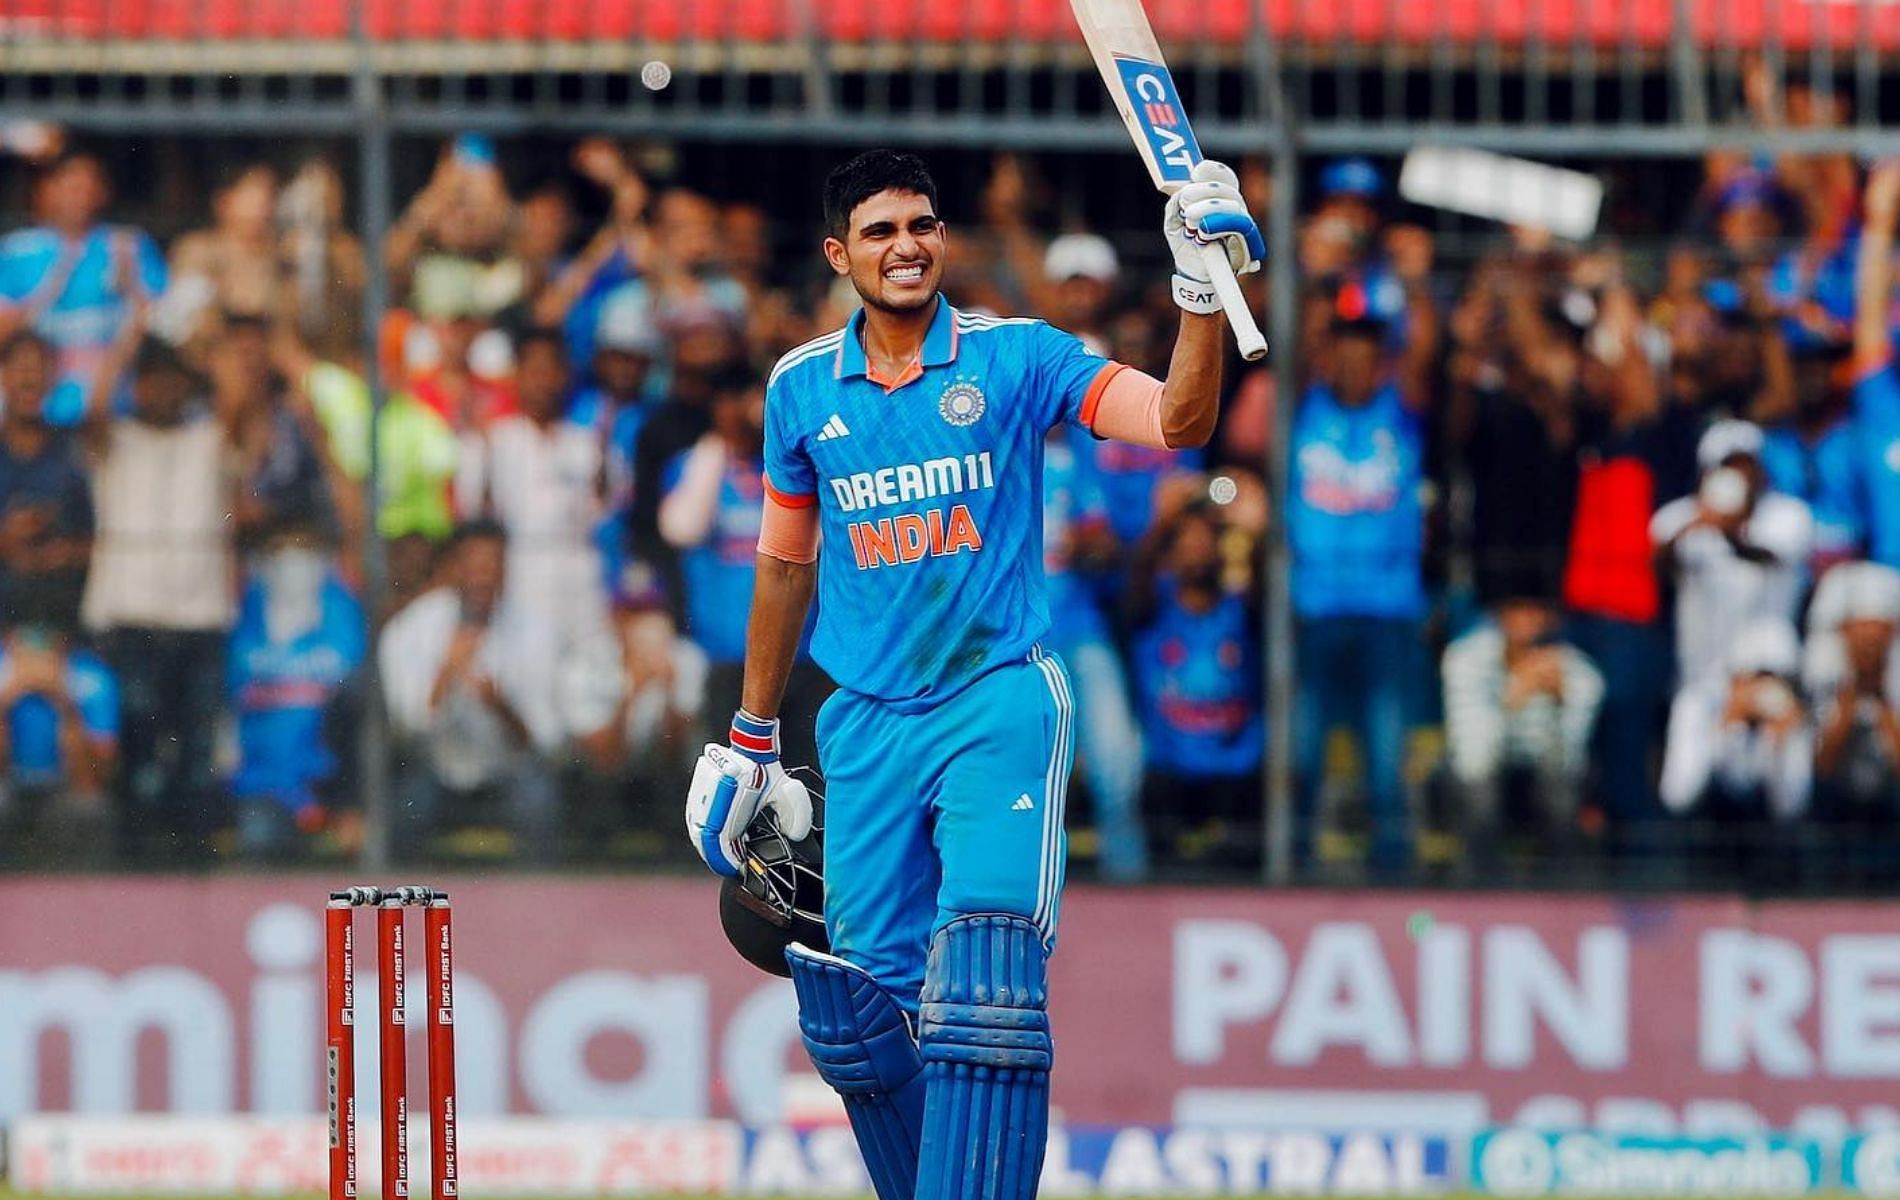 Shubman Gill has scored 1230 runs from 20 ODIs this year. (Pic: Instagram)